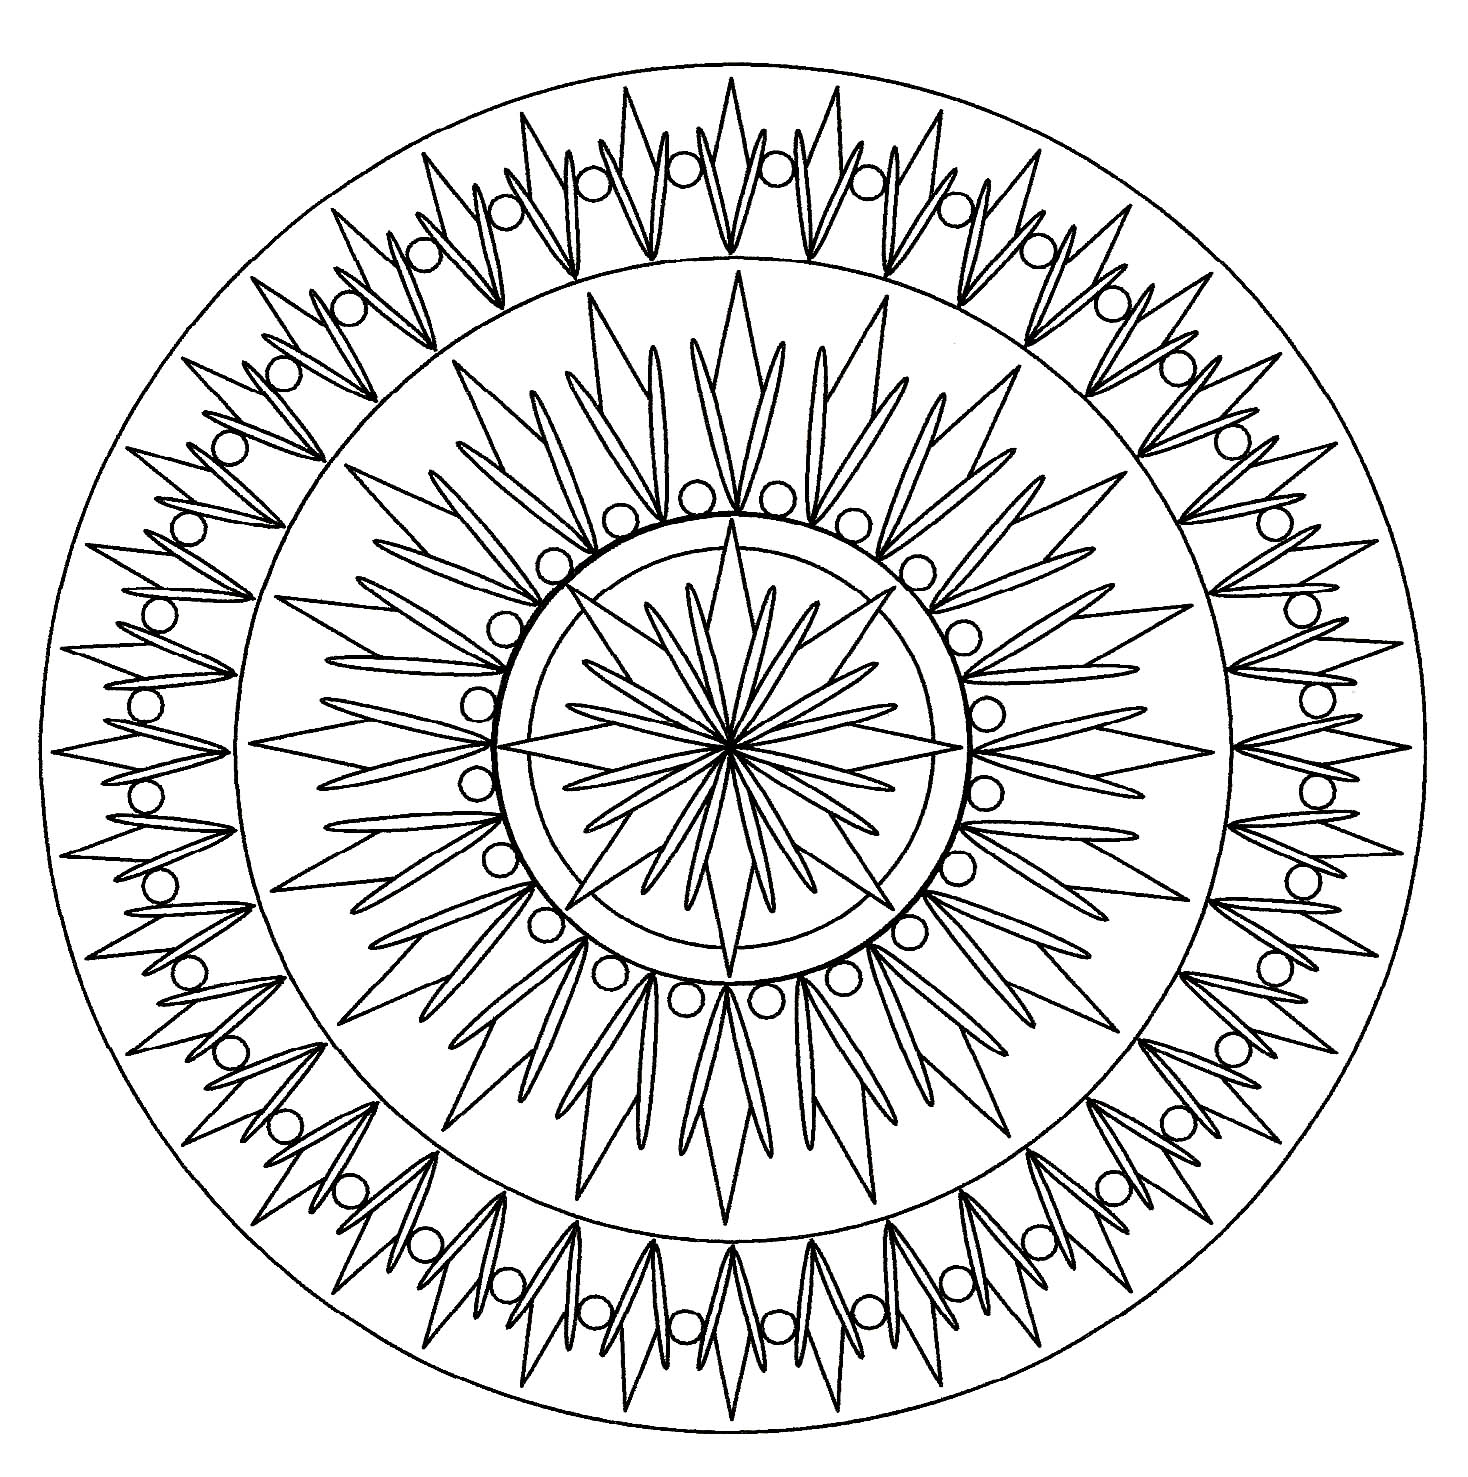 A Mandala out of the ordinary, which will allow you to spend a good time coloring, without complicating your life with too little areas, if it's not what you search for.